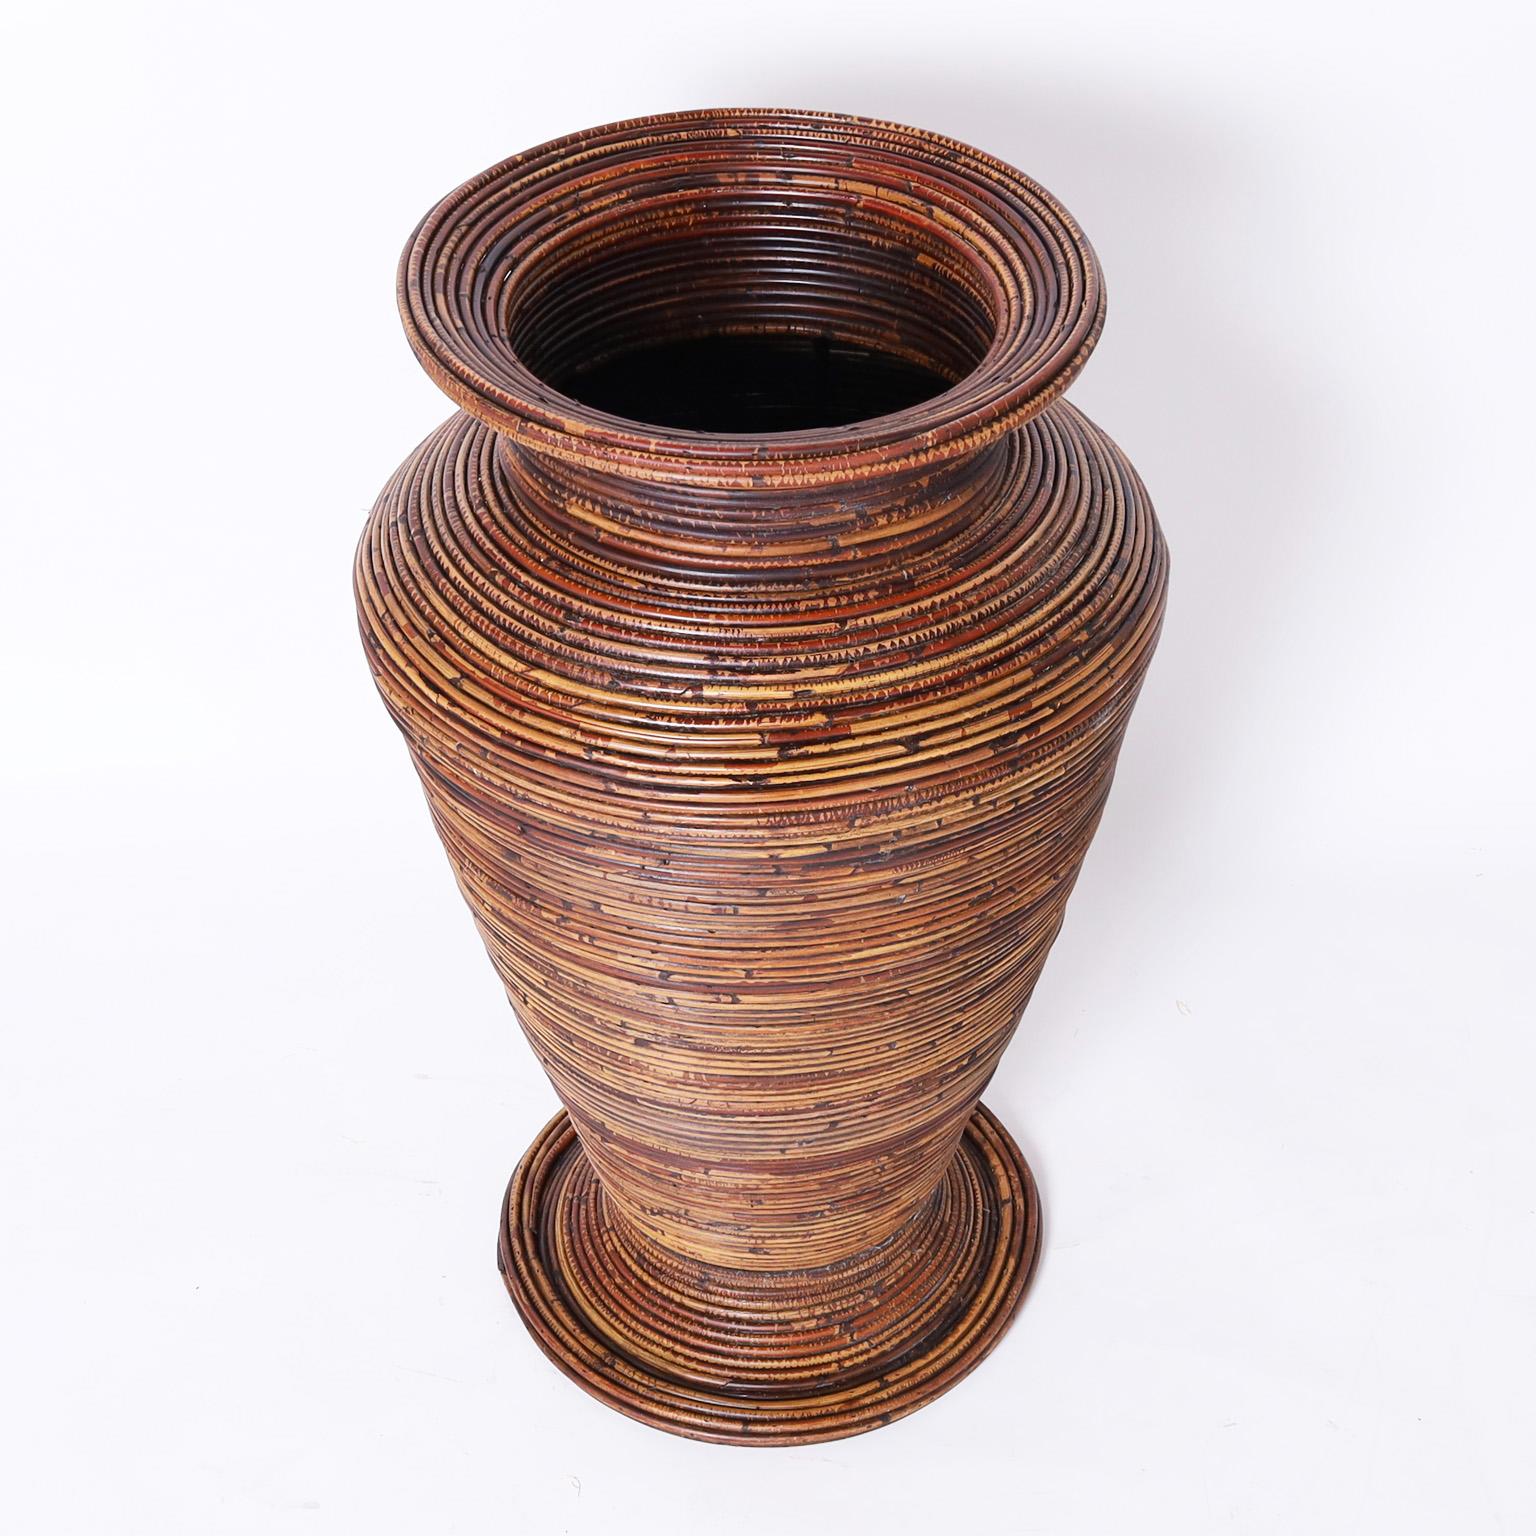 Large and impressive mid-century urn crafted in pencil reed in a classic modern form with a lush variegated brown finish.